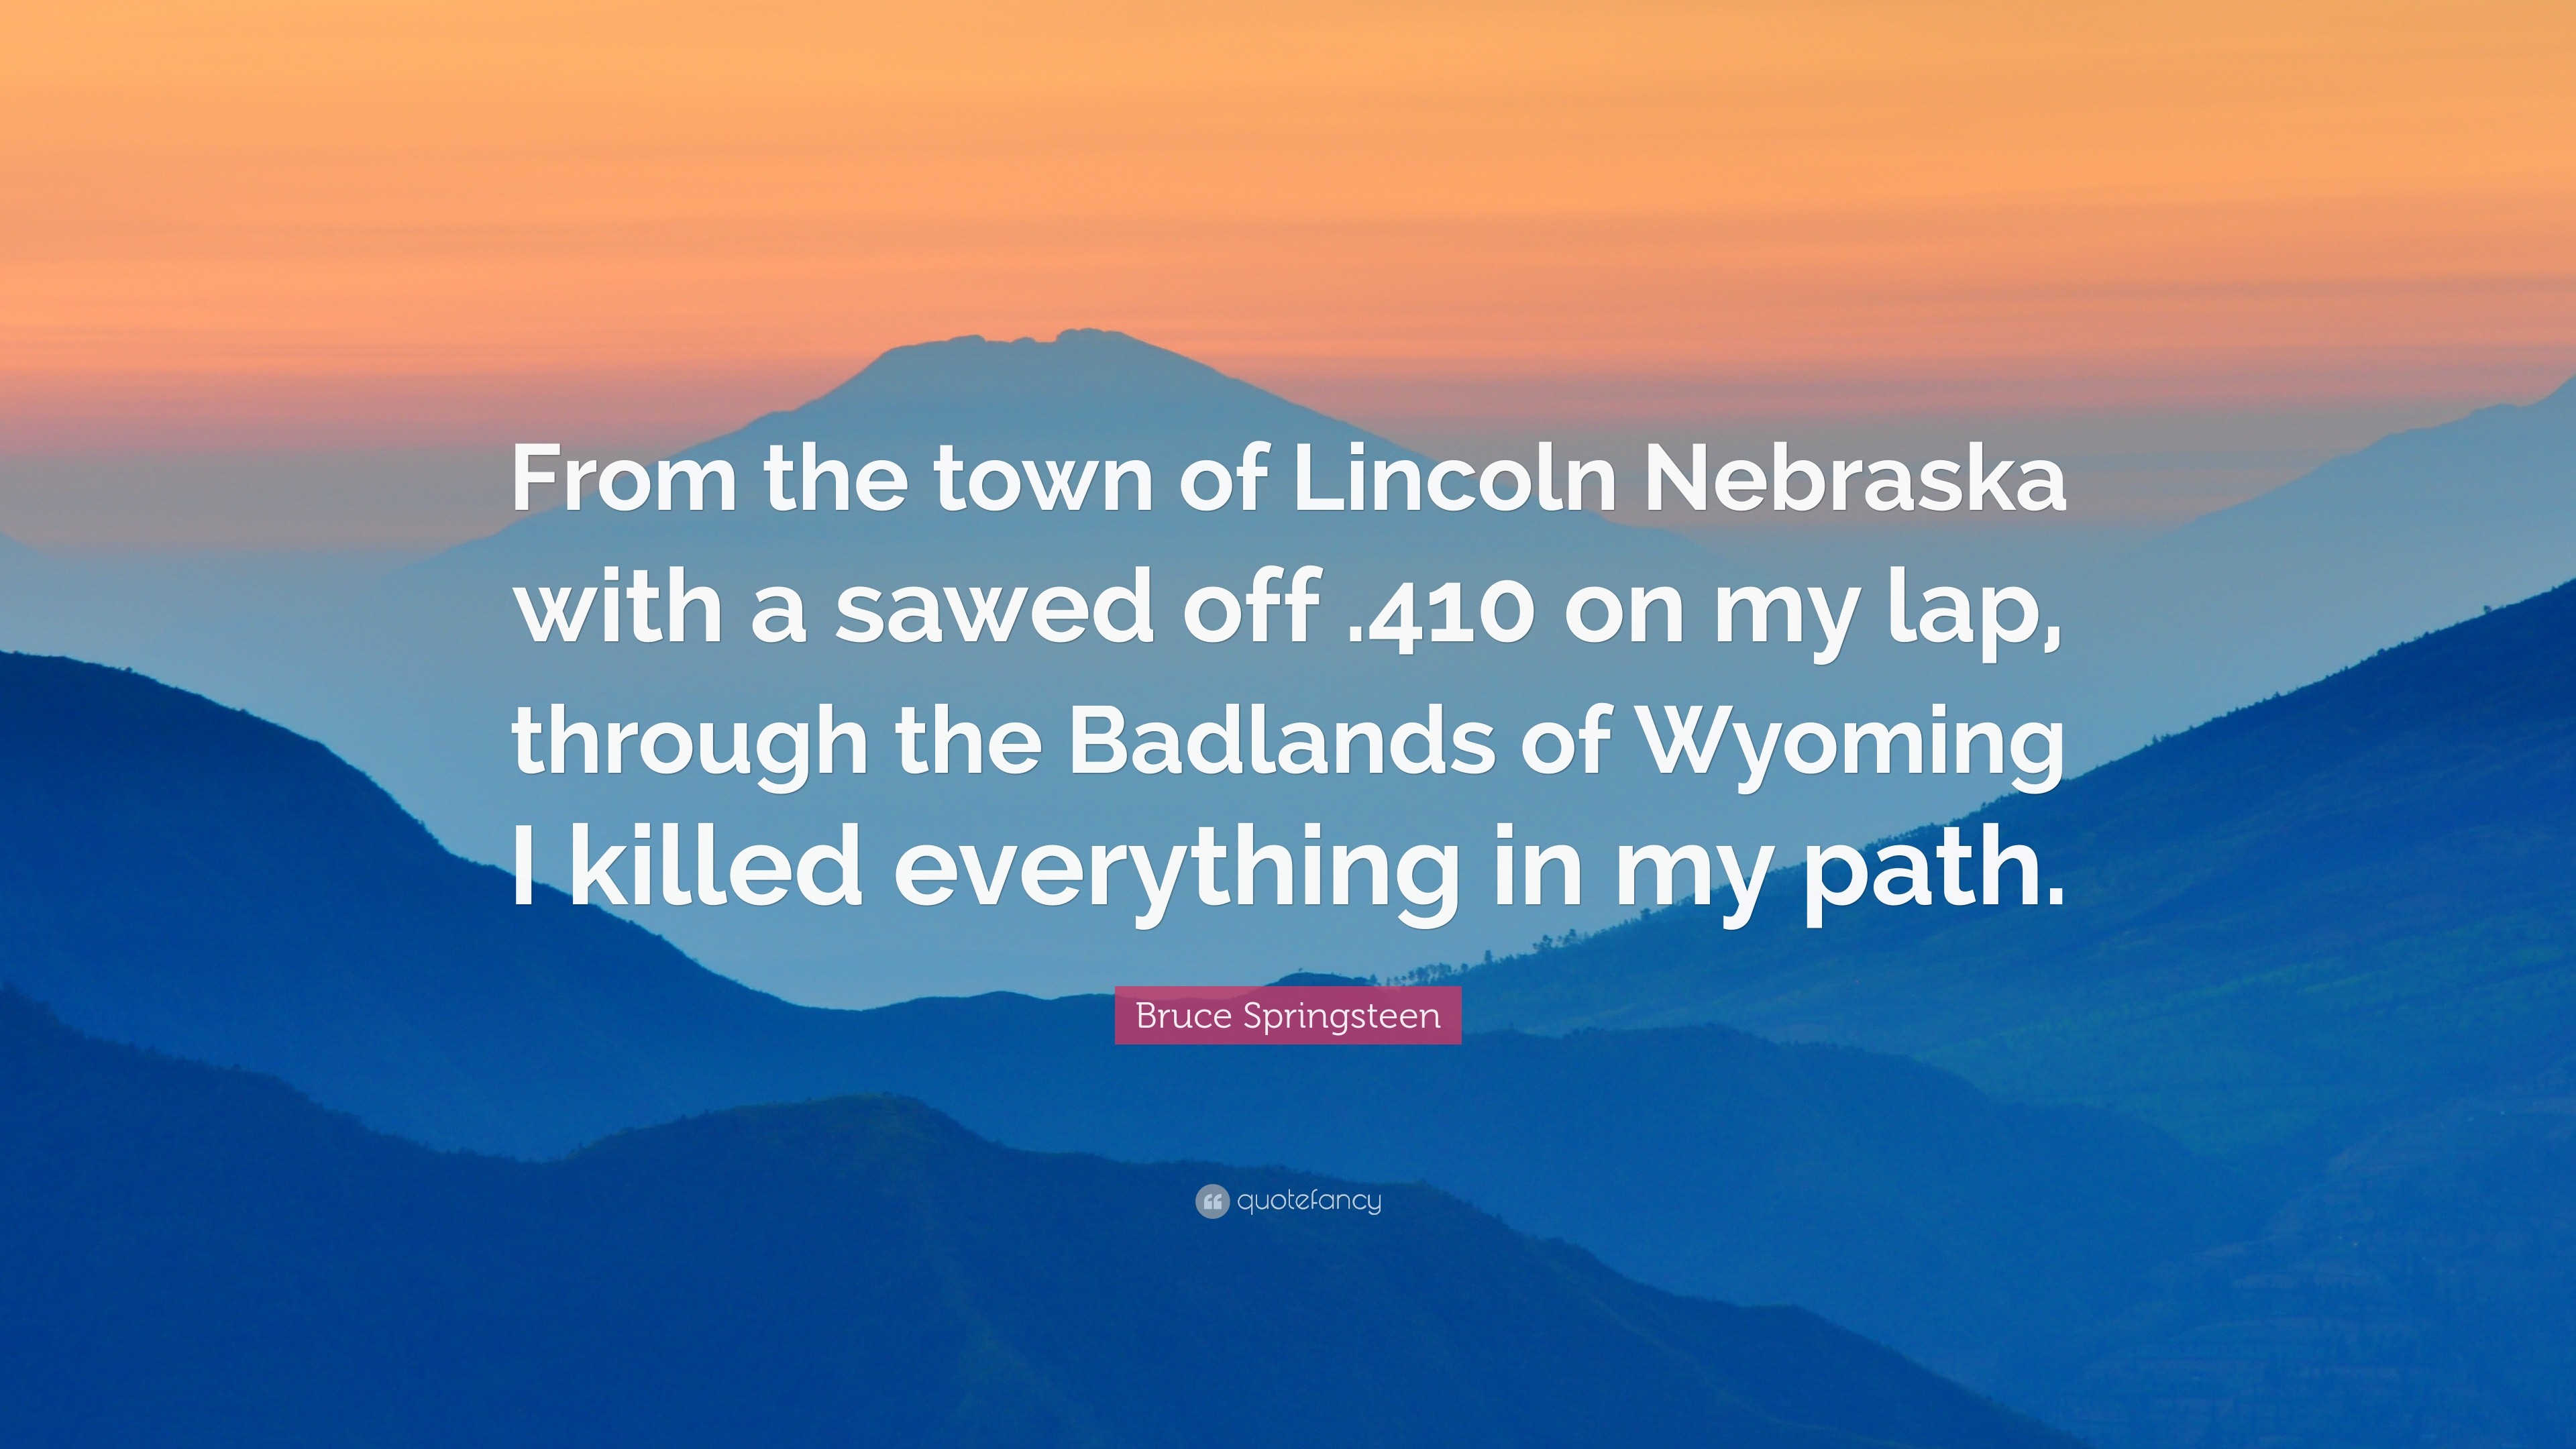 3840x2160 Bruce Springsteen Quote: “From the town of Lincoln Nebraska with a sawed  off .